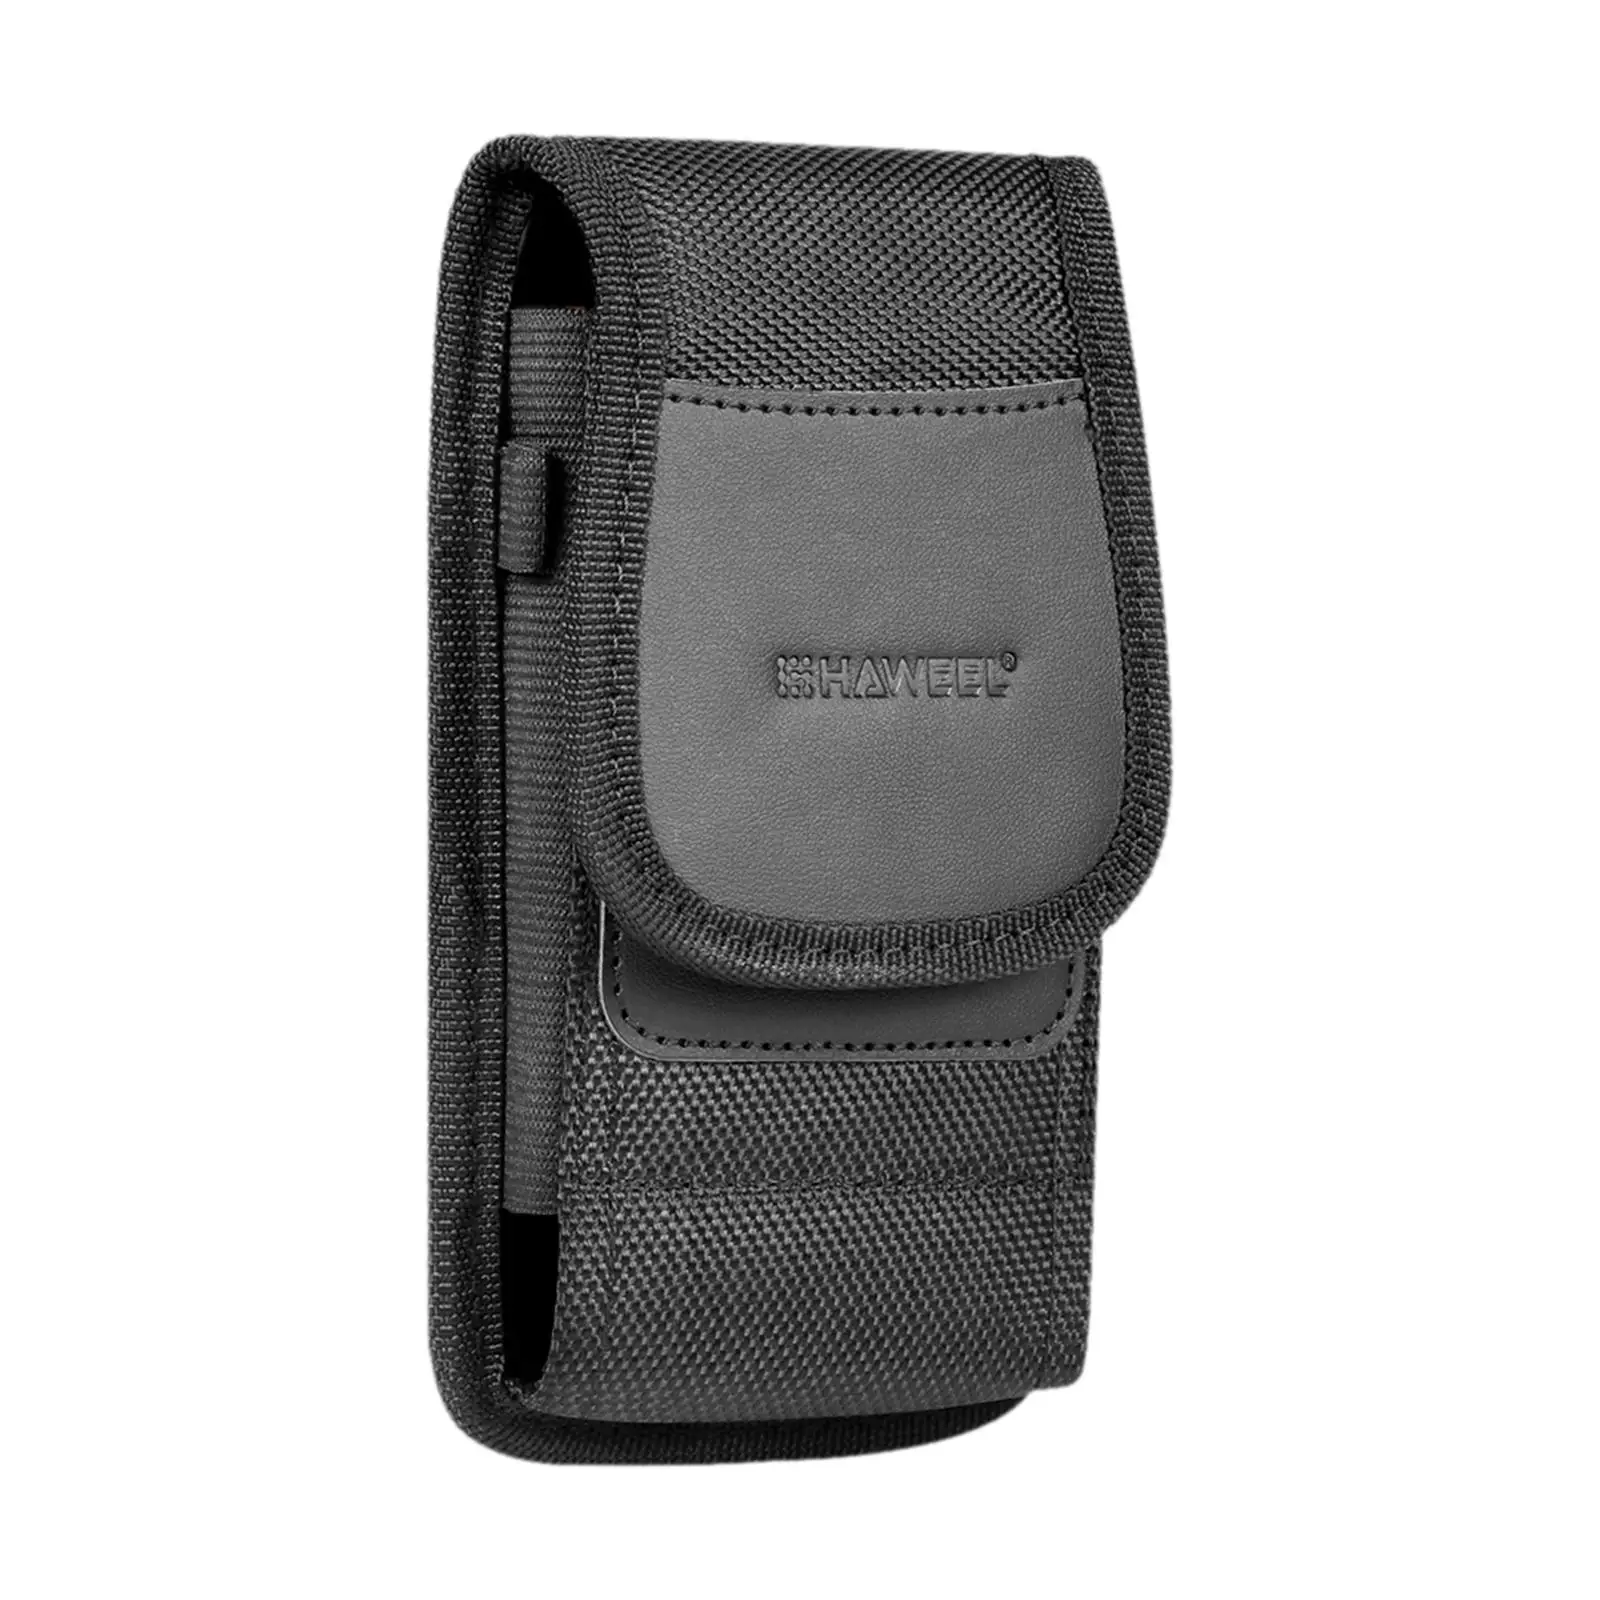 Phone Holster Cell Phone Accessory Waist Bag Nylon Carrying Pouch Smartphone